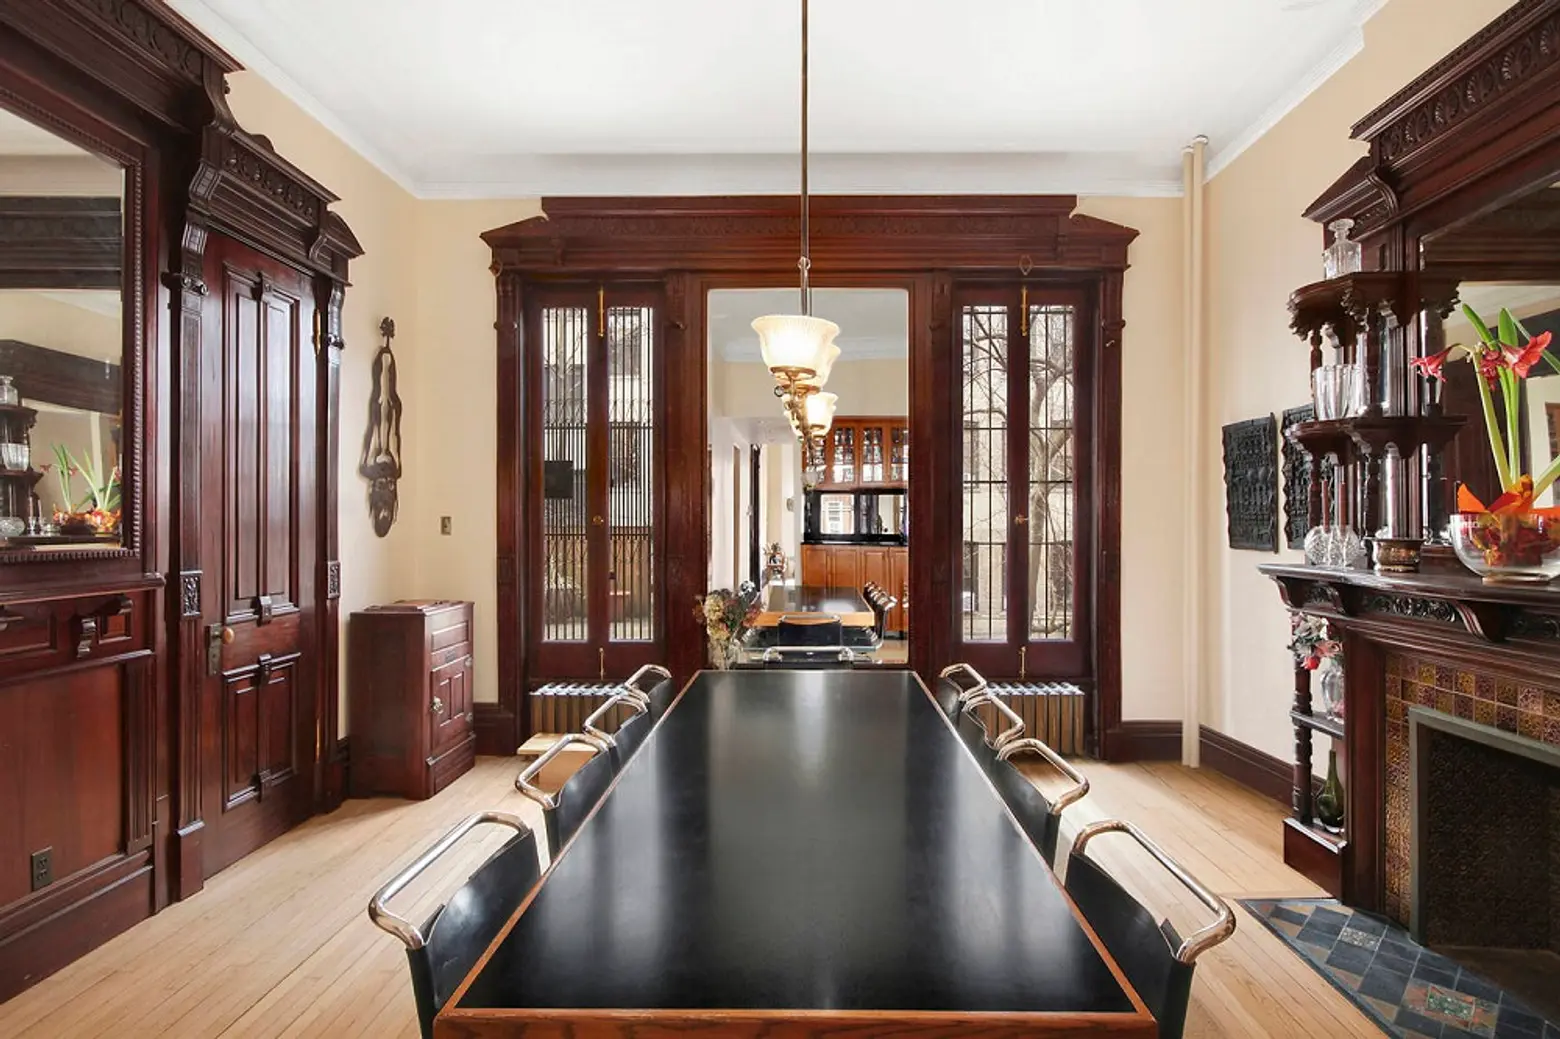 Stunning Mahogany Woodwork Steals the Show in This $3.5M Park Slope Brownstone